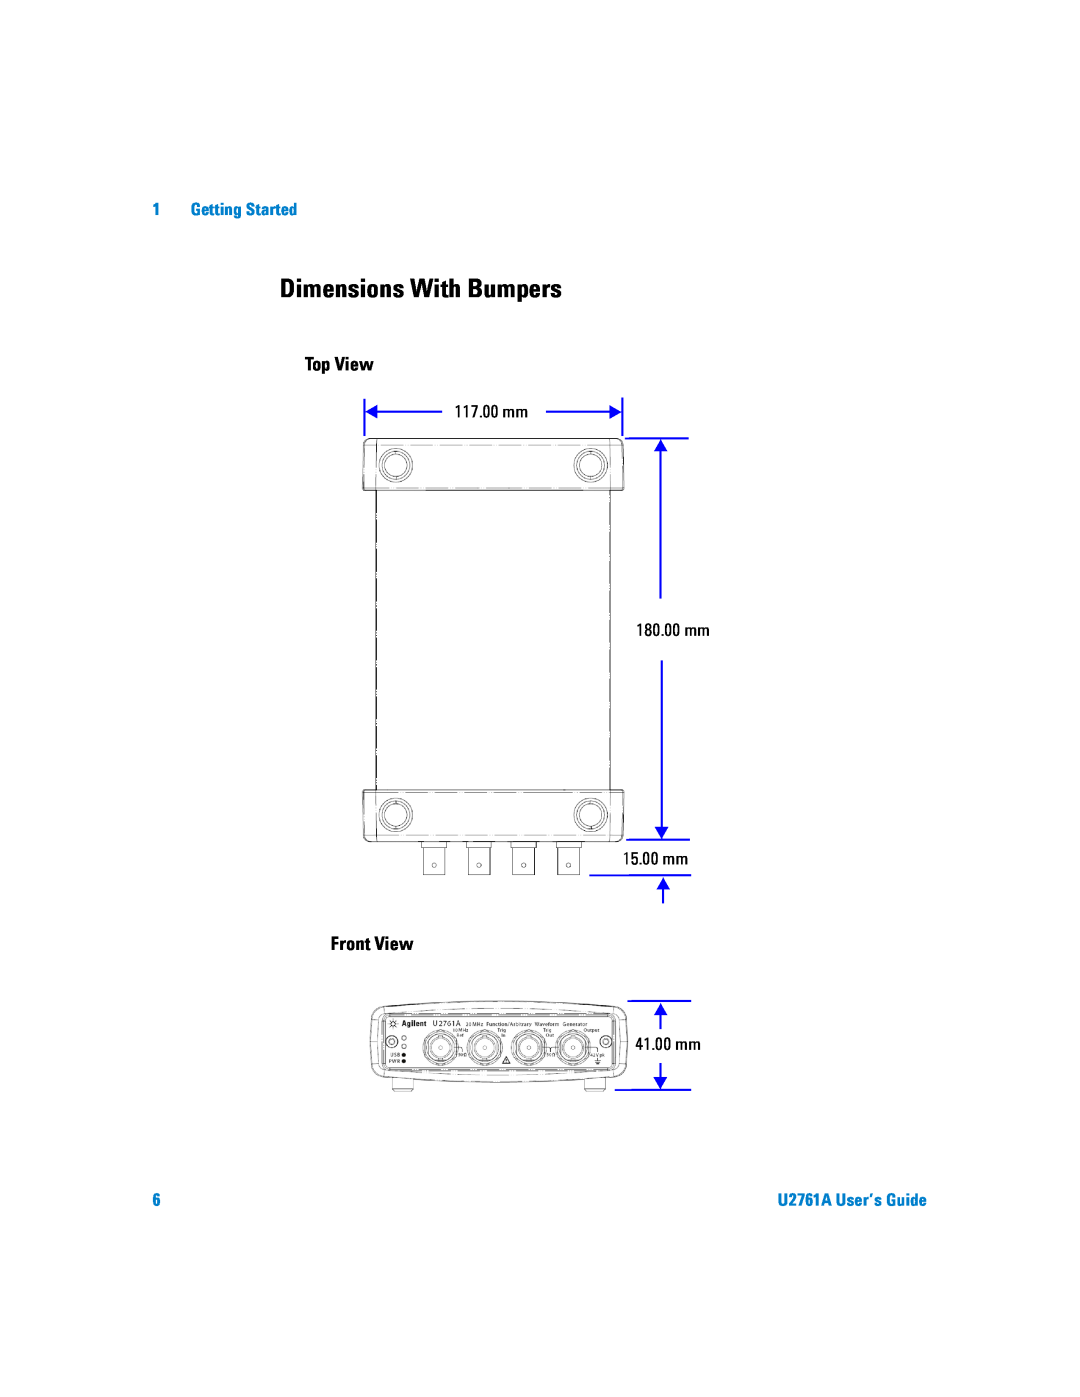 Agilent Technologies manual Dimensions With Bumpers, Top View, Front View, Getting Started, U2761A User’s Guide 